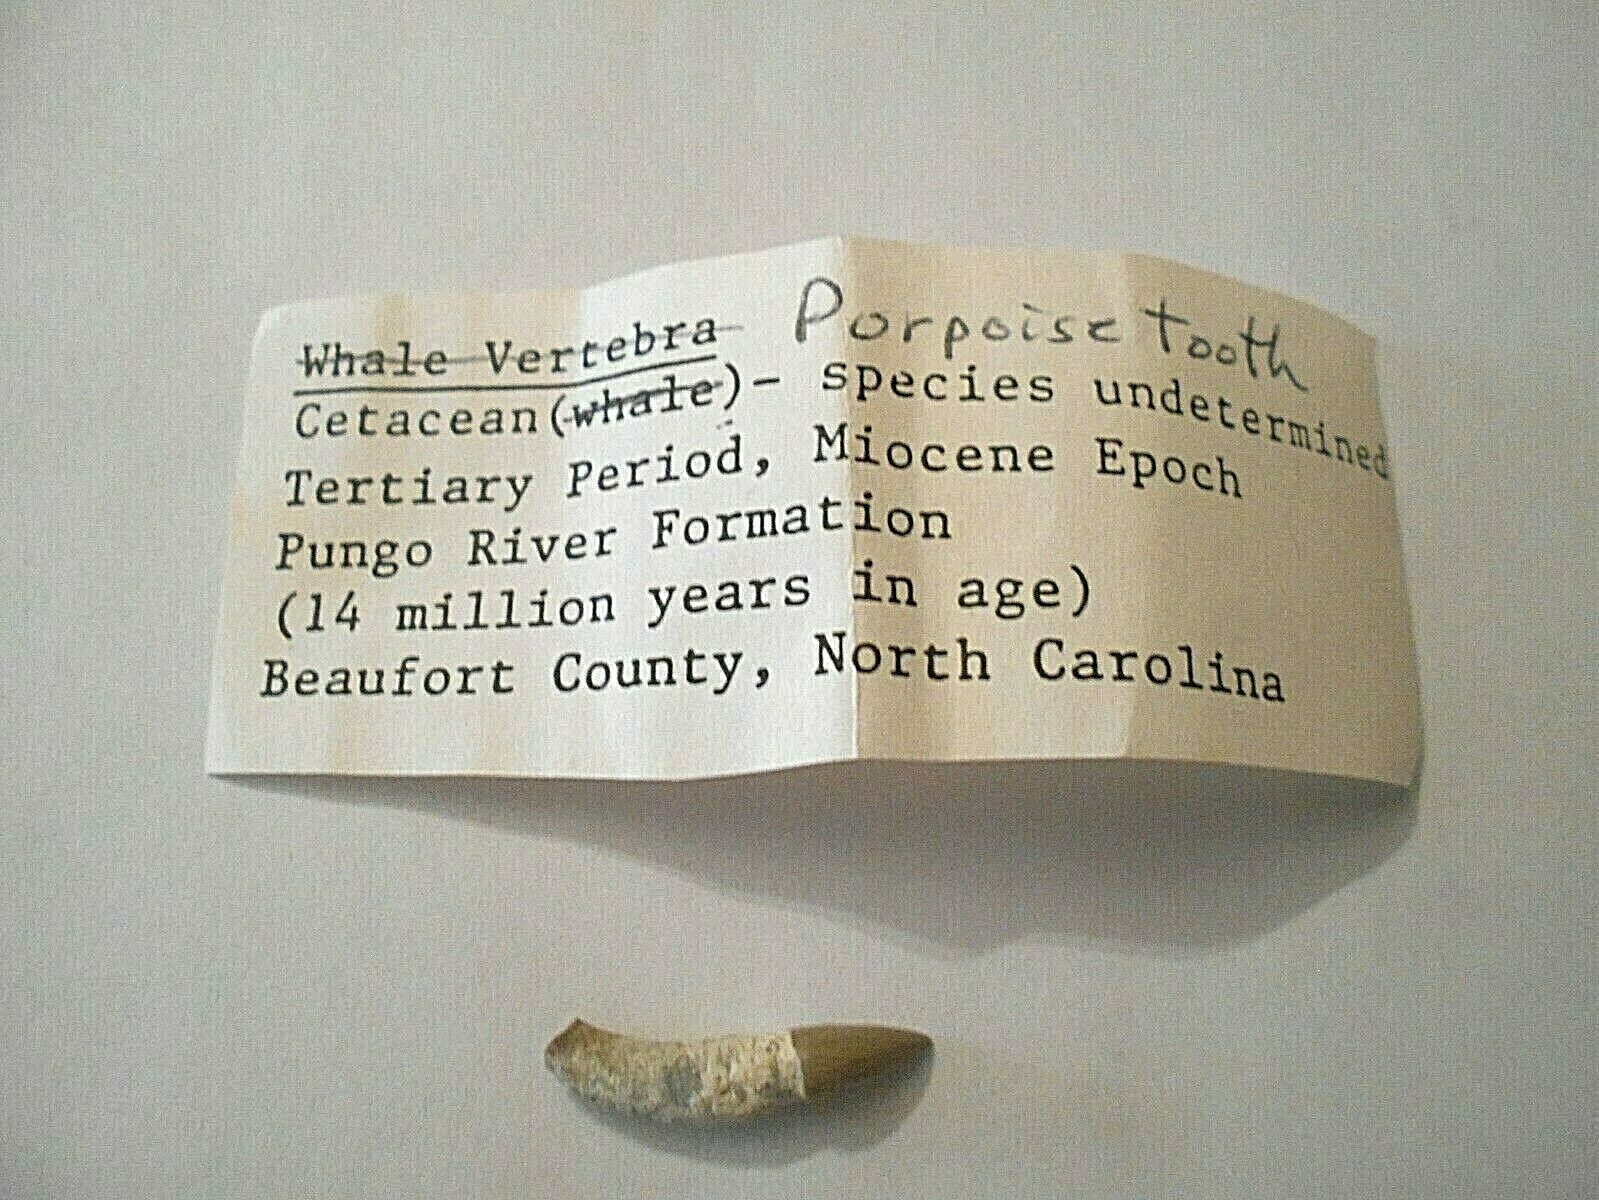 Porpoise Tooth - Cetacean - Beaufort County, North Carolina